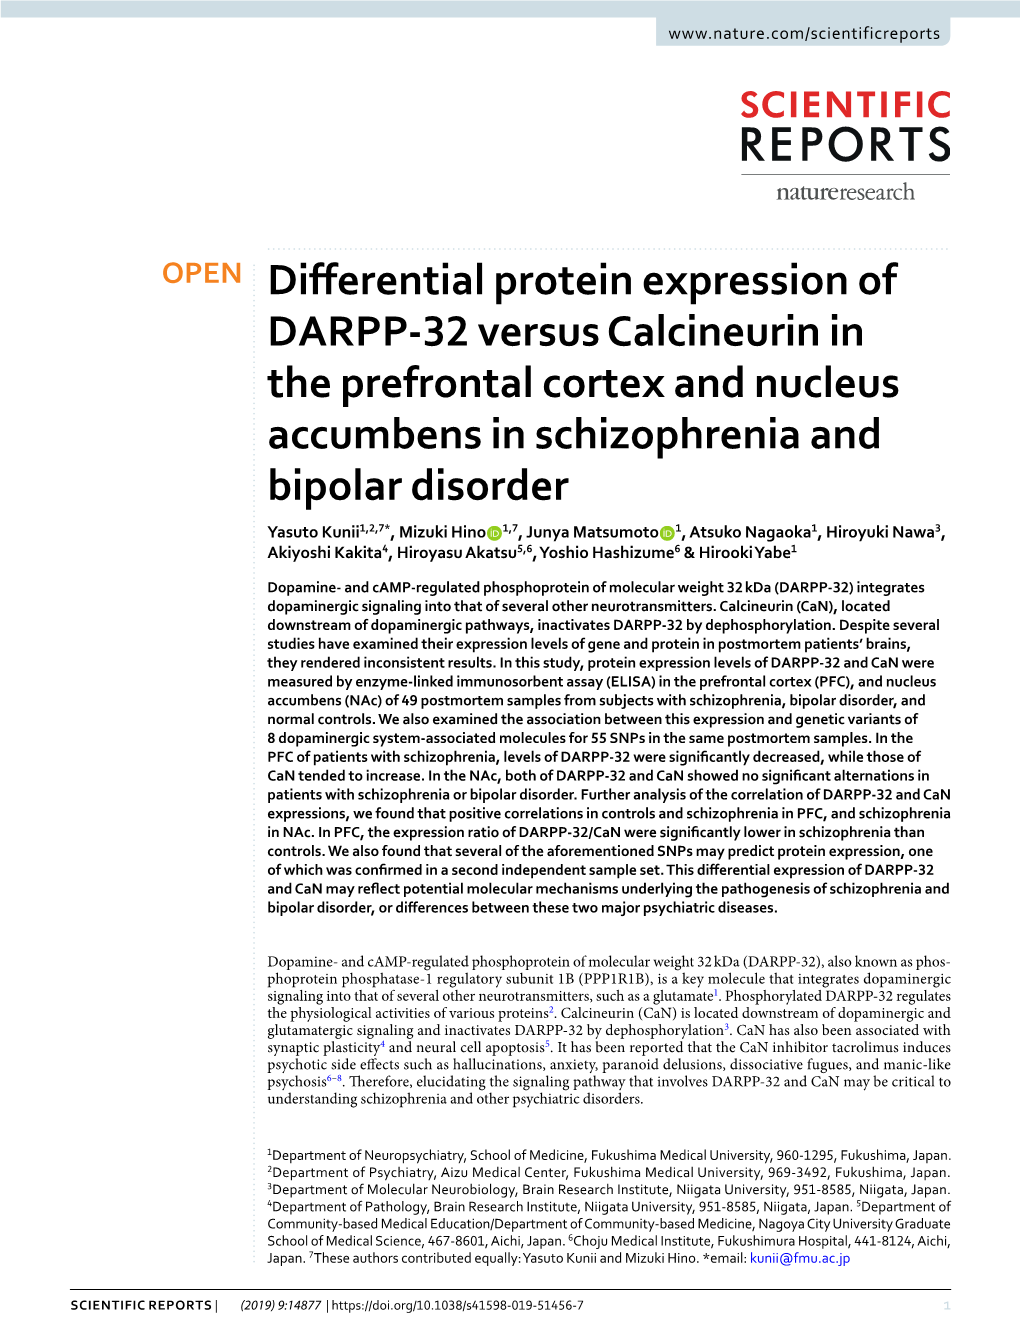 Differential Protein Expression of DARPP-32 Versus Calcineurin In